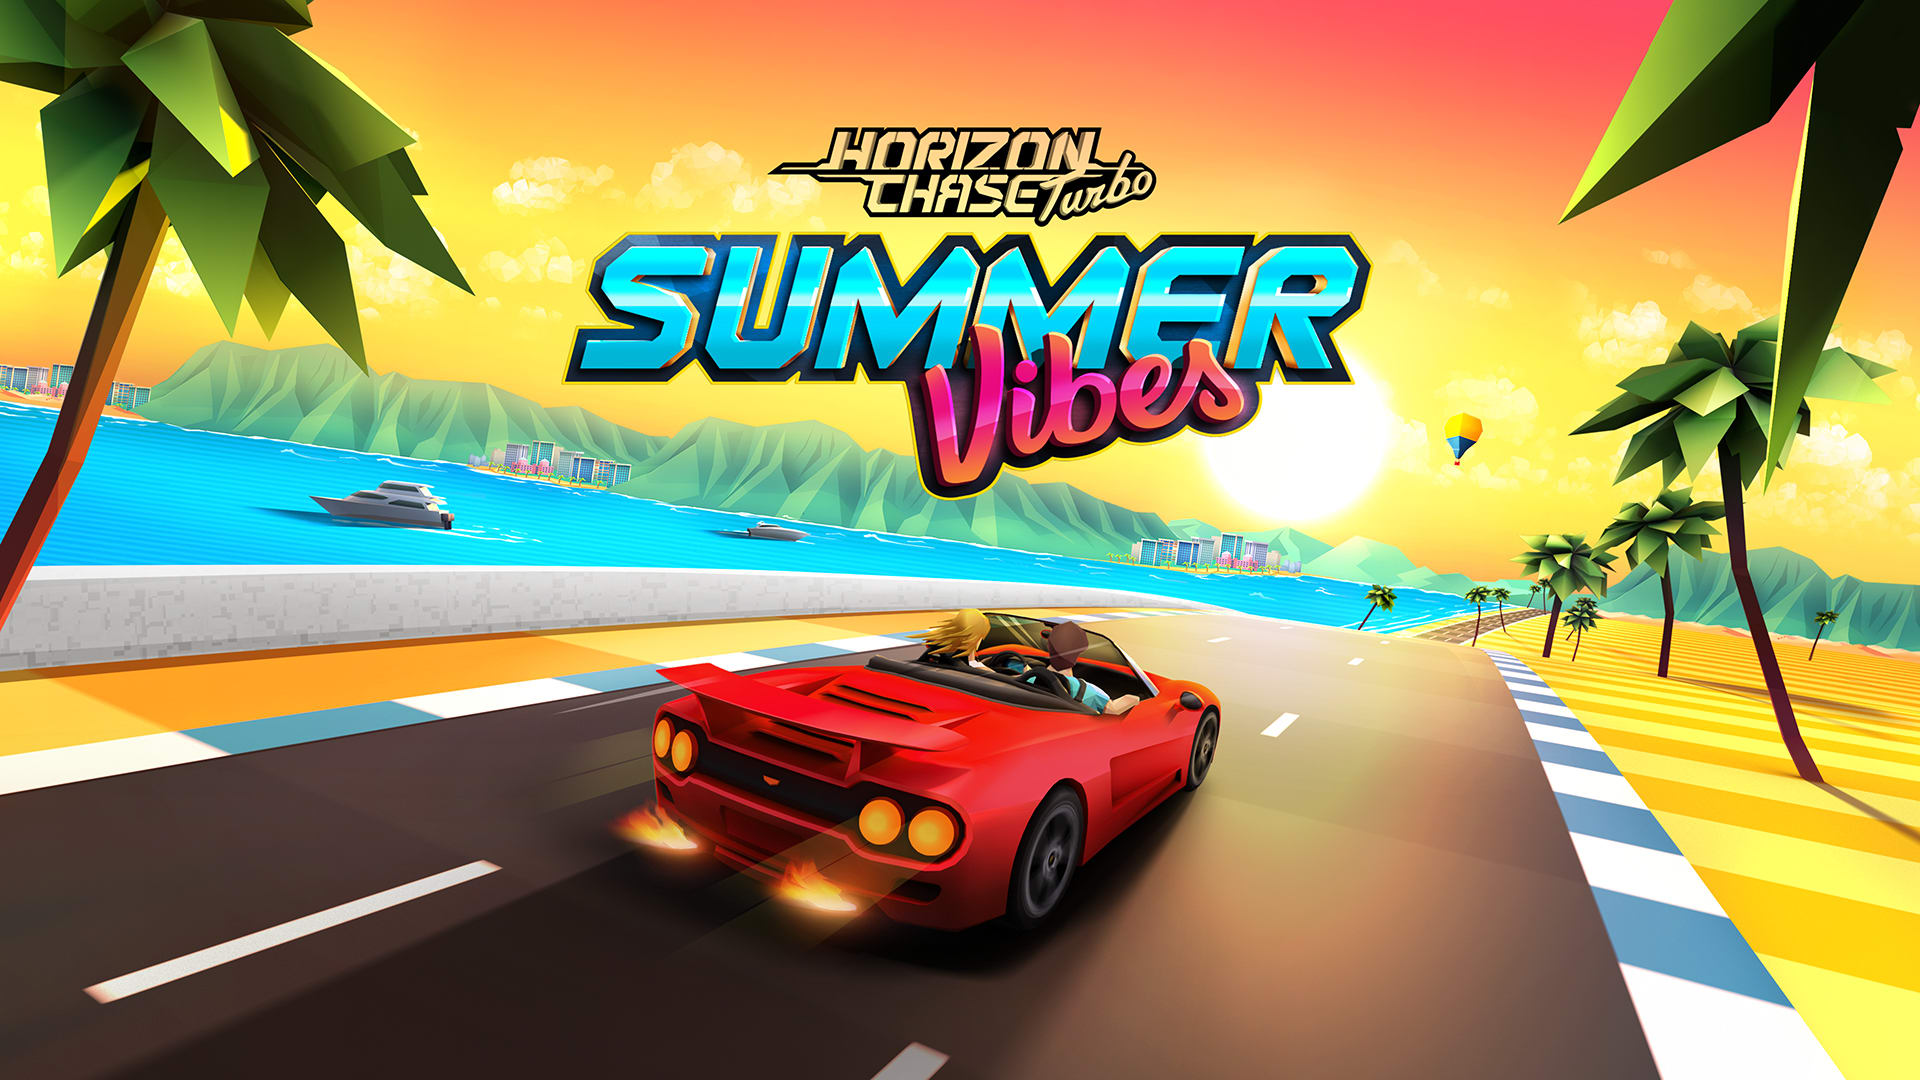 Horizon Chase Turbo - Summer Vibes (PHYSICAL VERSION)